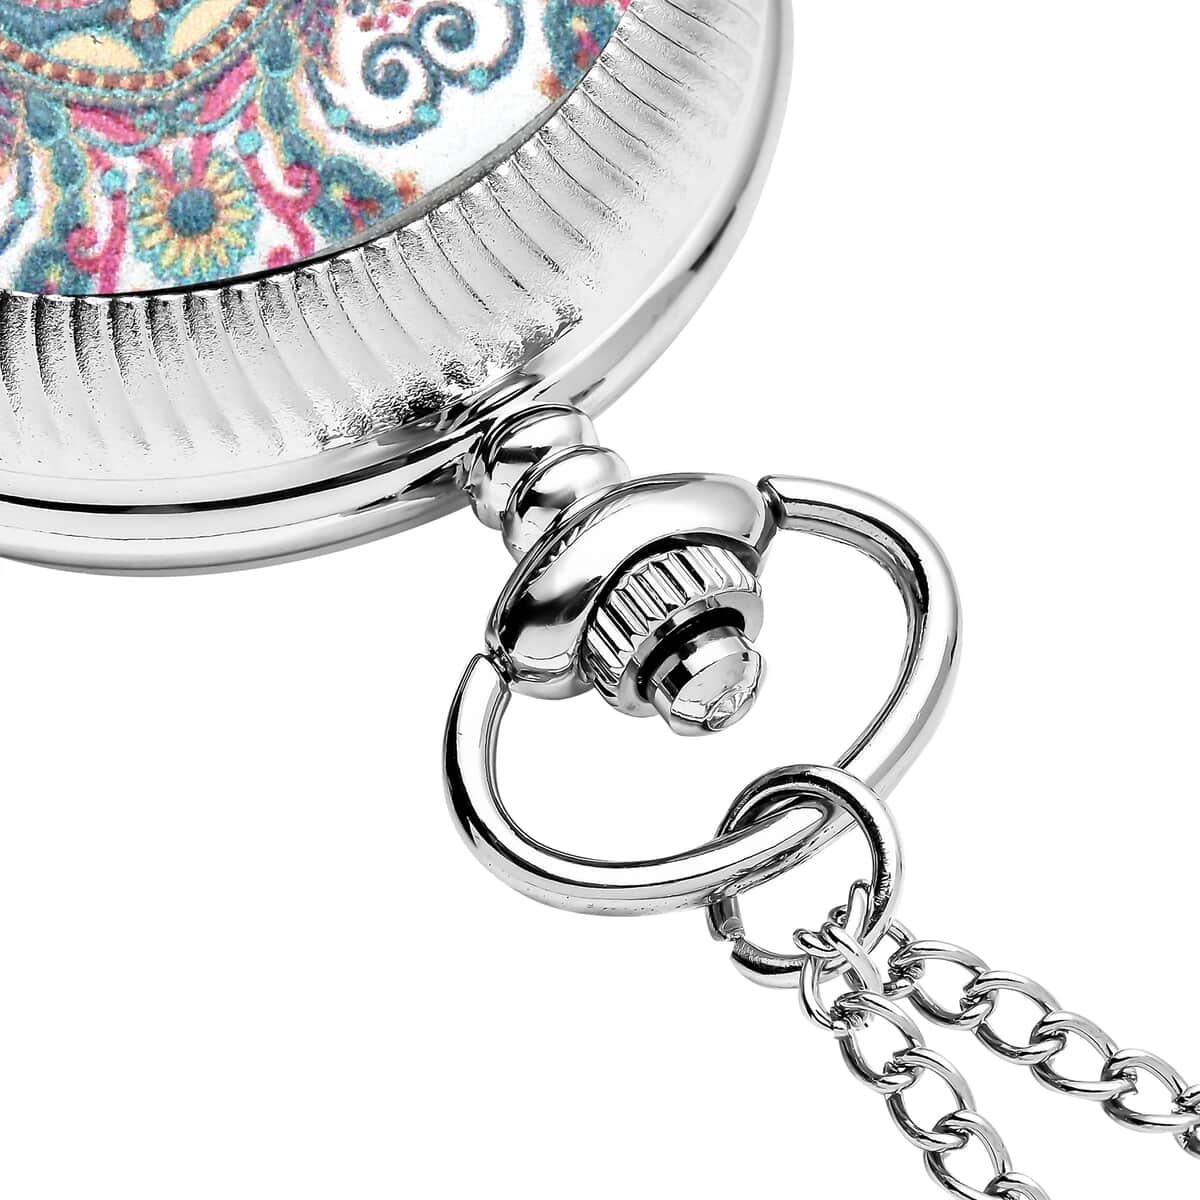 Strada Japanese Movement Multi Color Flower Pattern Rotating Pocket Watch with Silvertone Chain (up to 31 Inches) image number 4